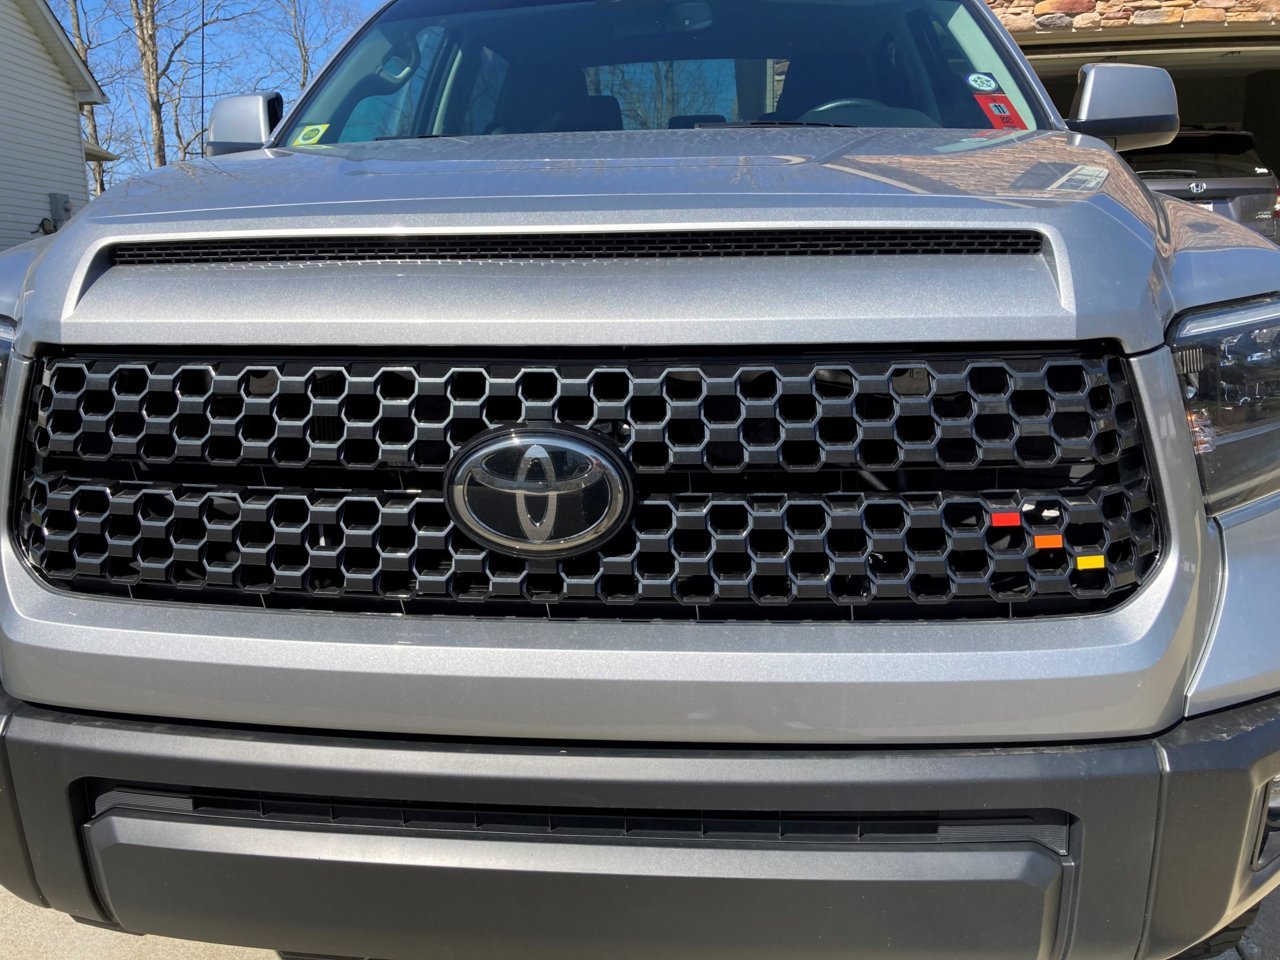 Grille Decal.jpg